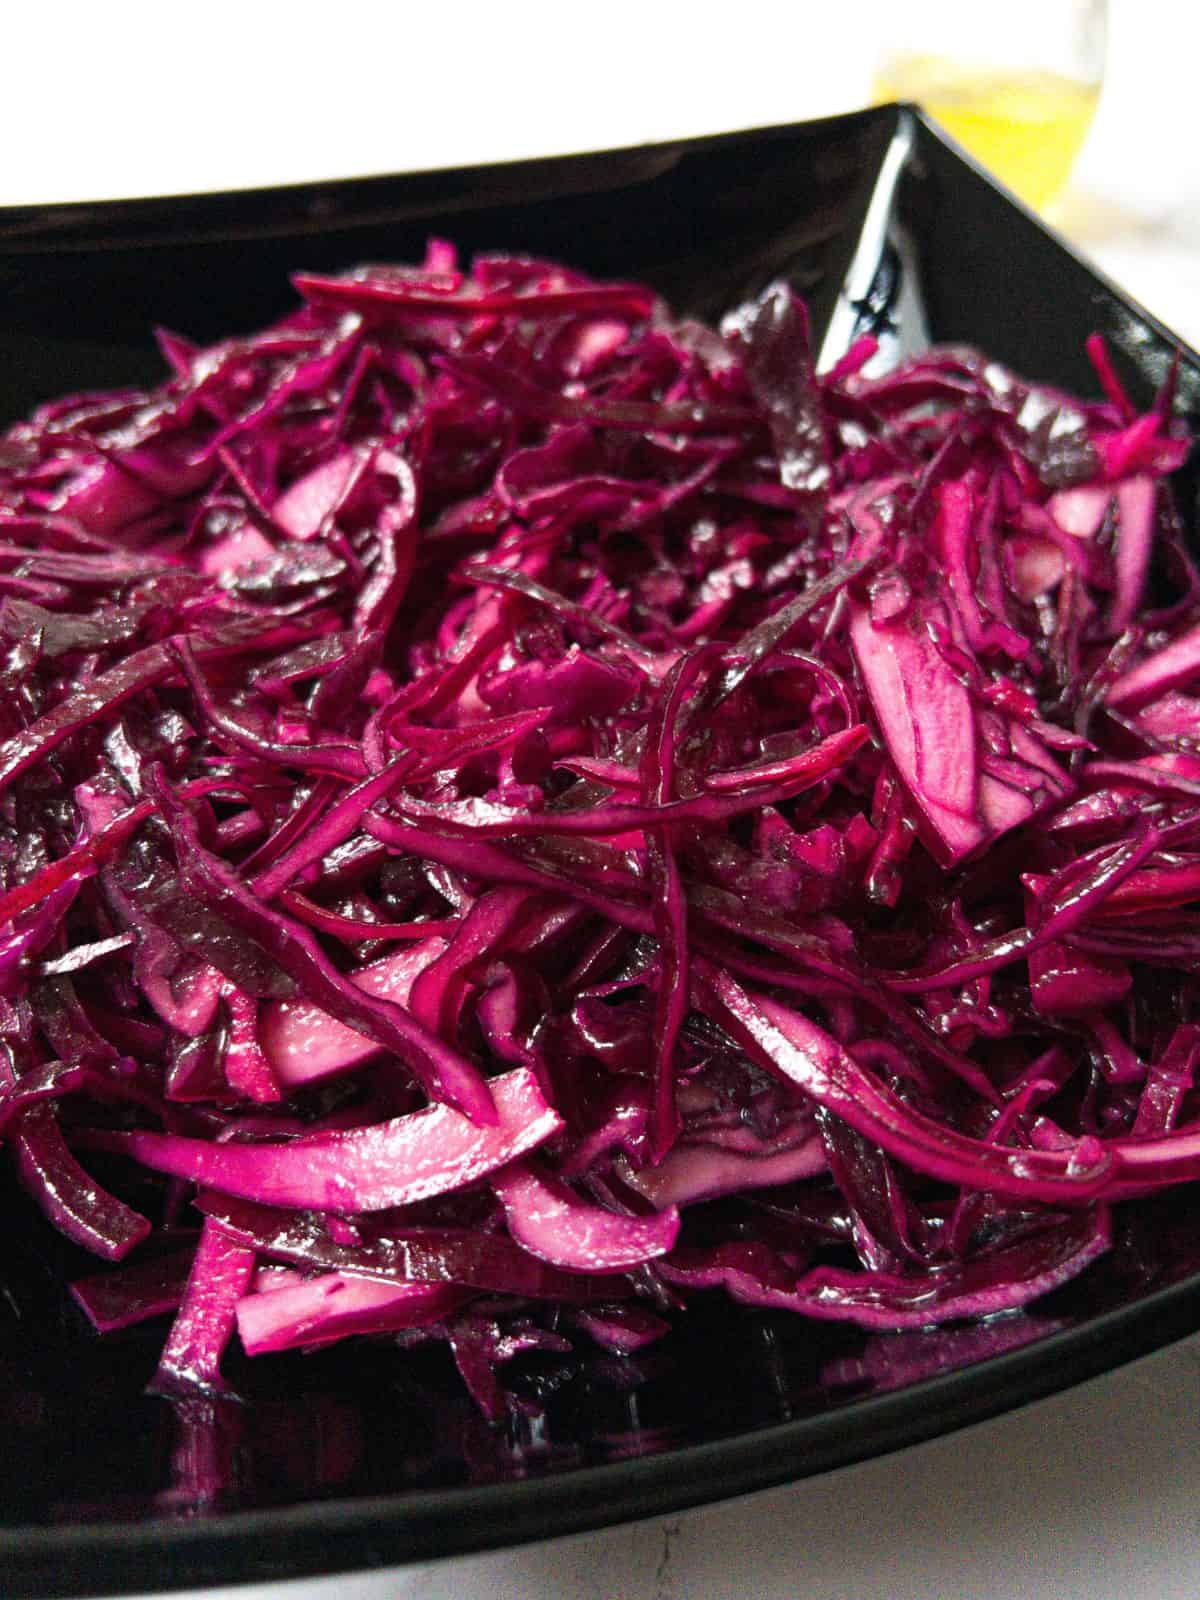 Shredded red kebab shop style cabbage in a black bowl.